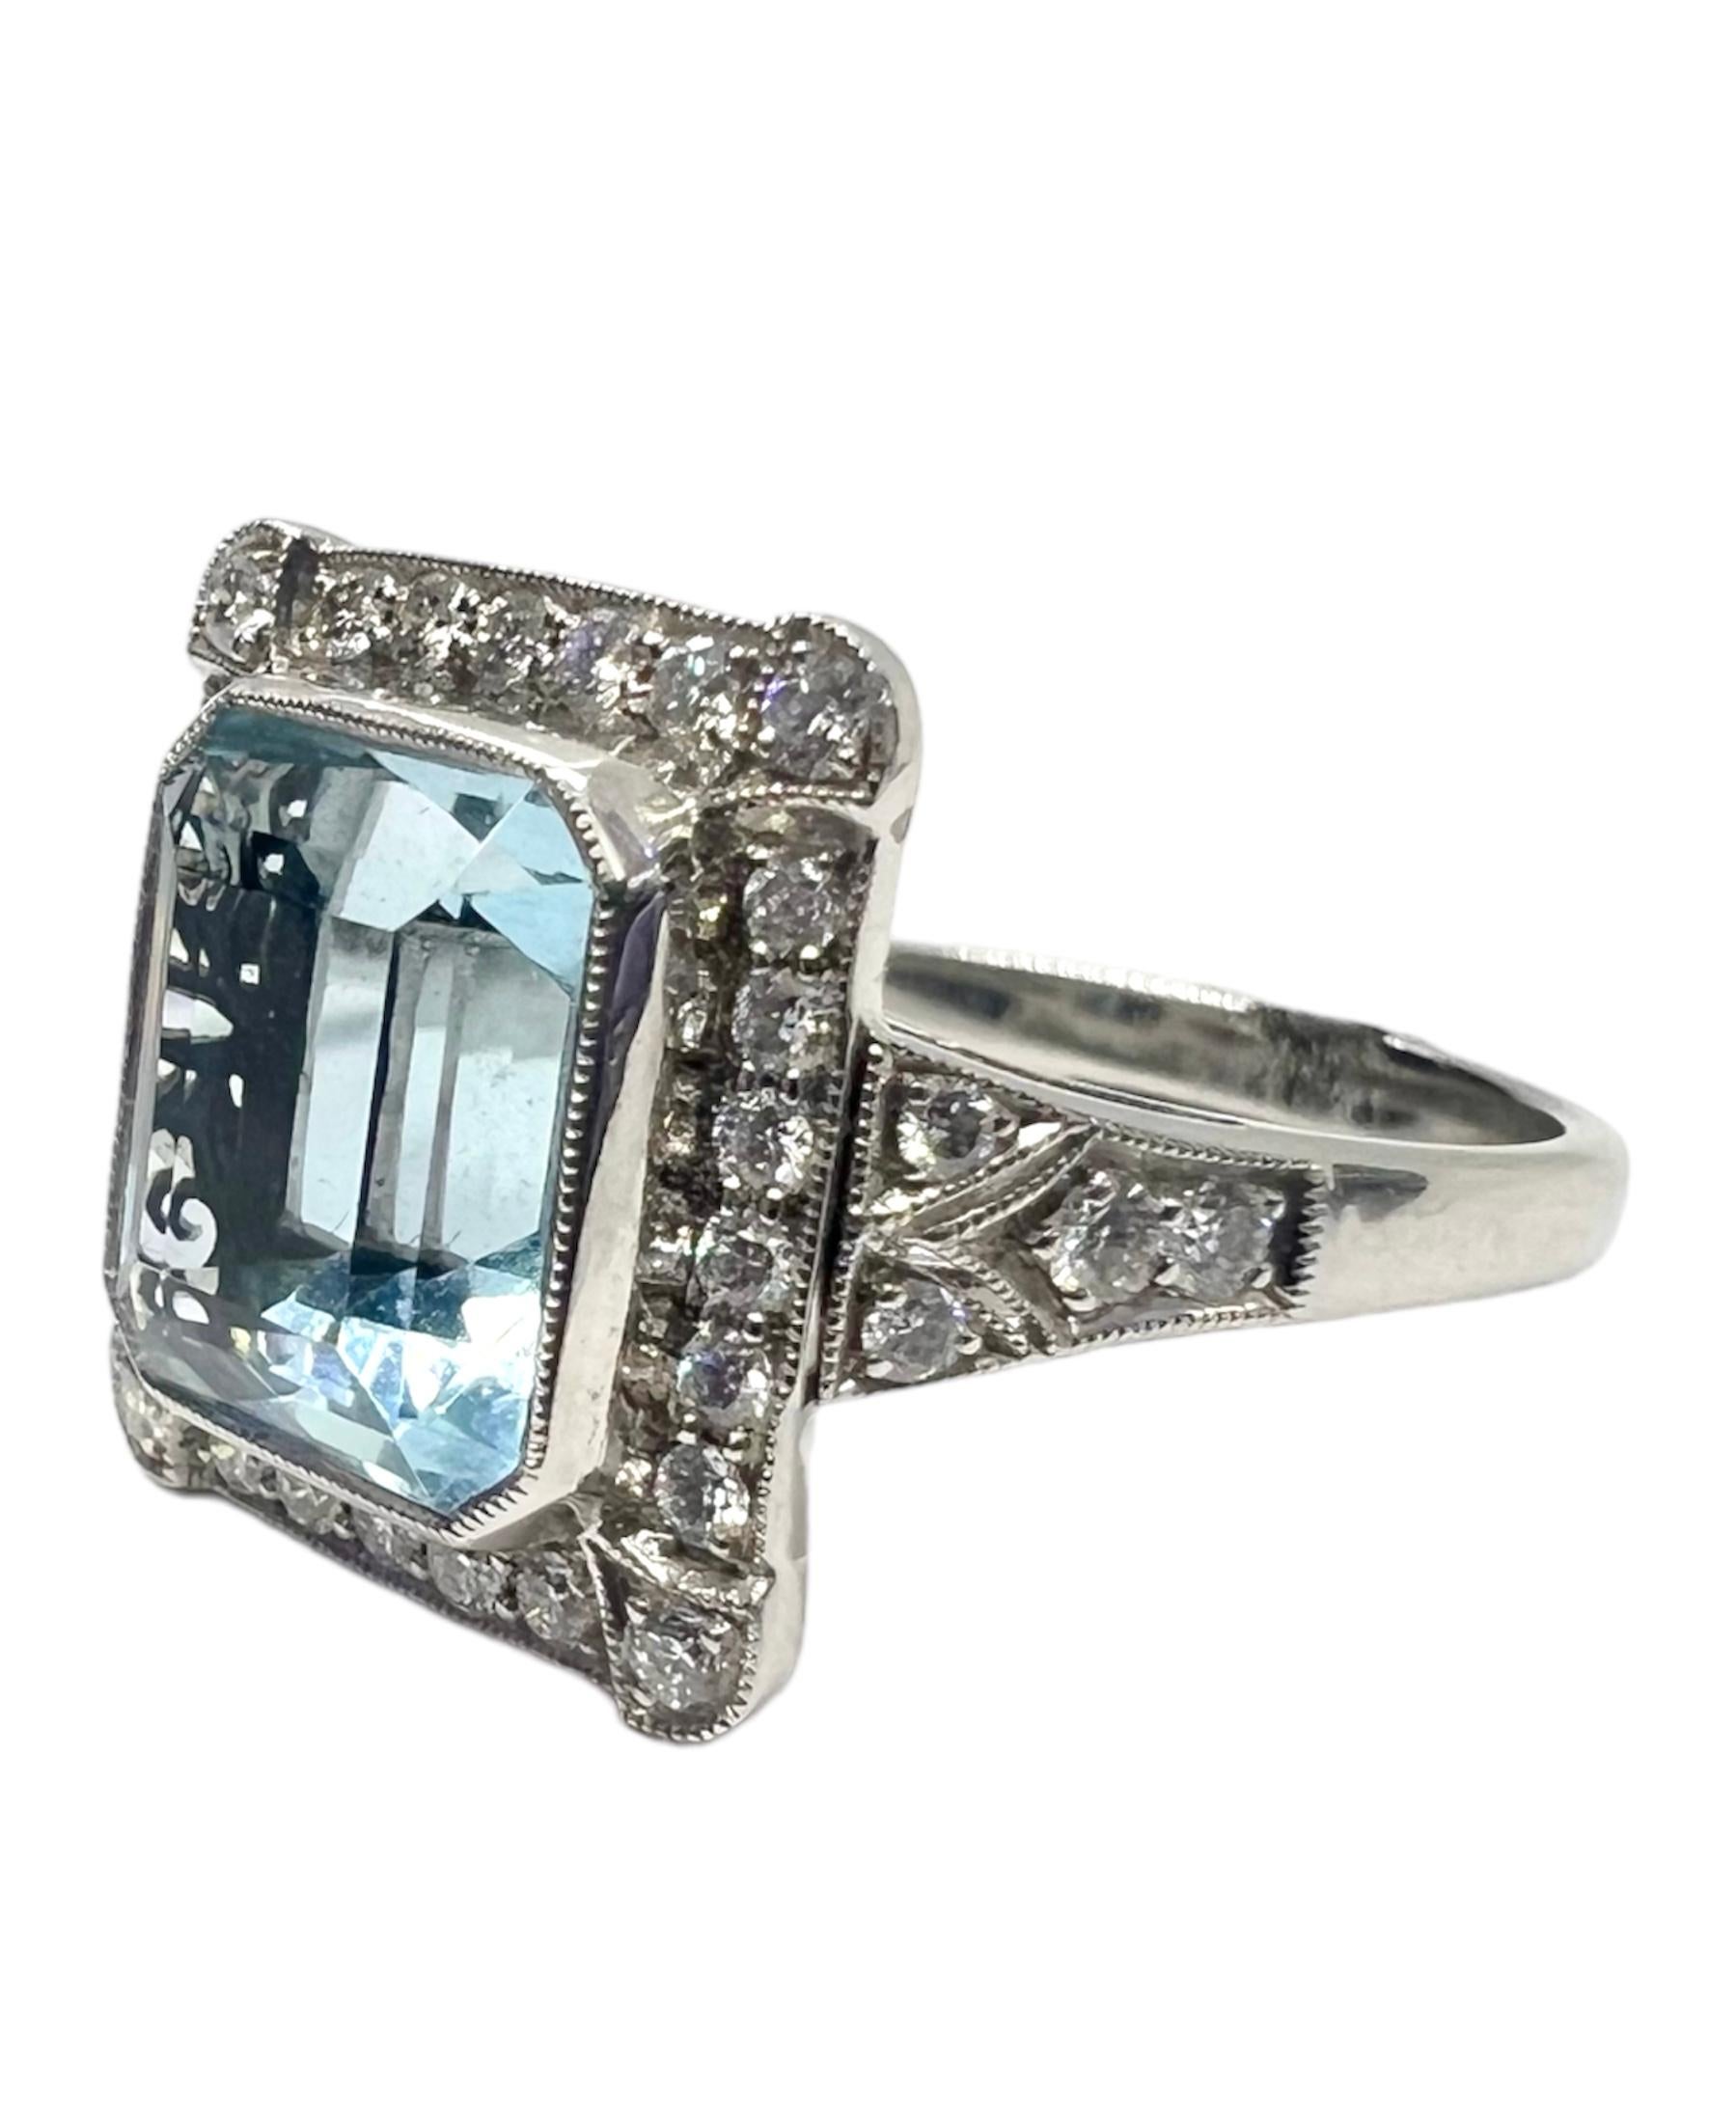 A ring set in platinum with 2.98 carat aquamarine and .34 carat diamond.

Sophia D by Joseph Dardashti LTD has been known worldwide for 35 years and are inspired by classic Art Deco design that merges with modern manufacturing techniques.